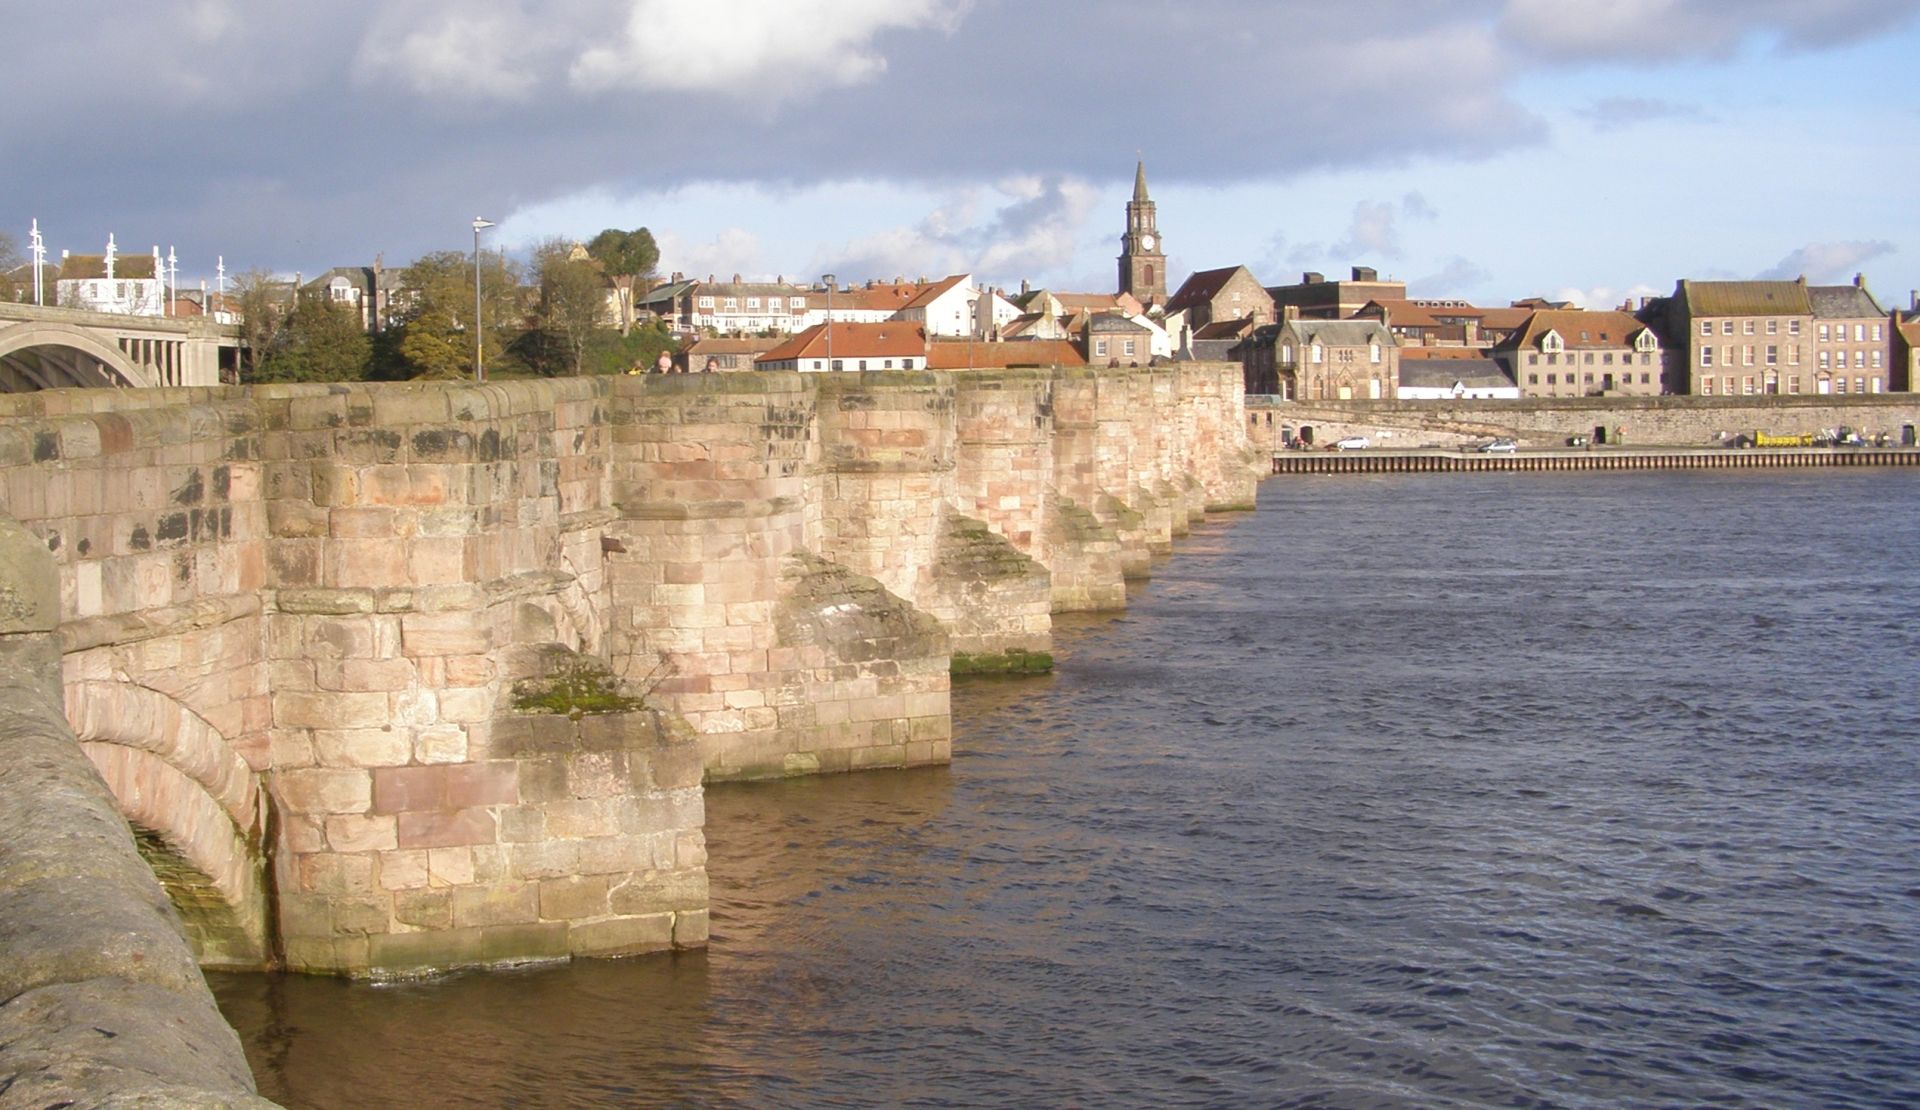 The Old Bridge, from Tweedmouth